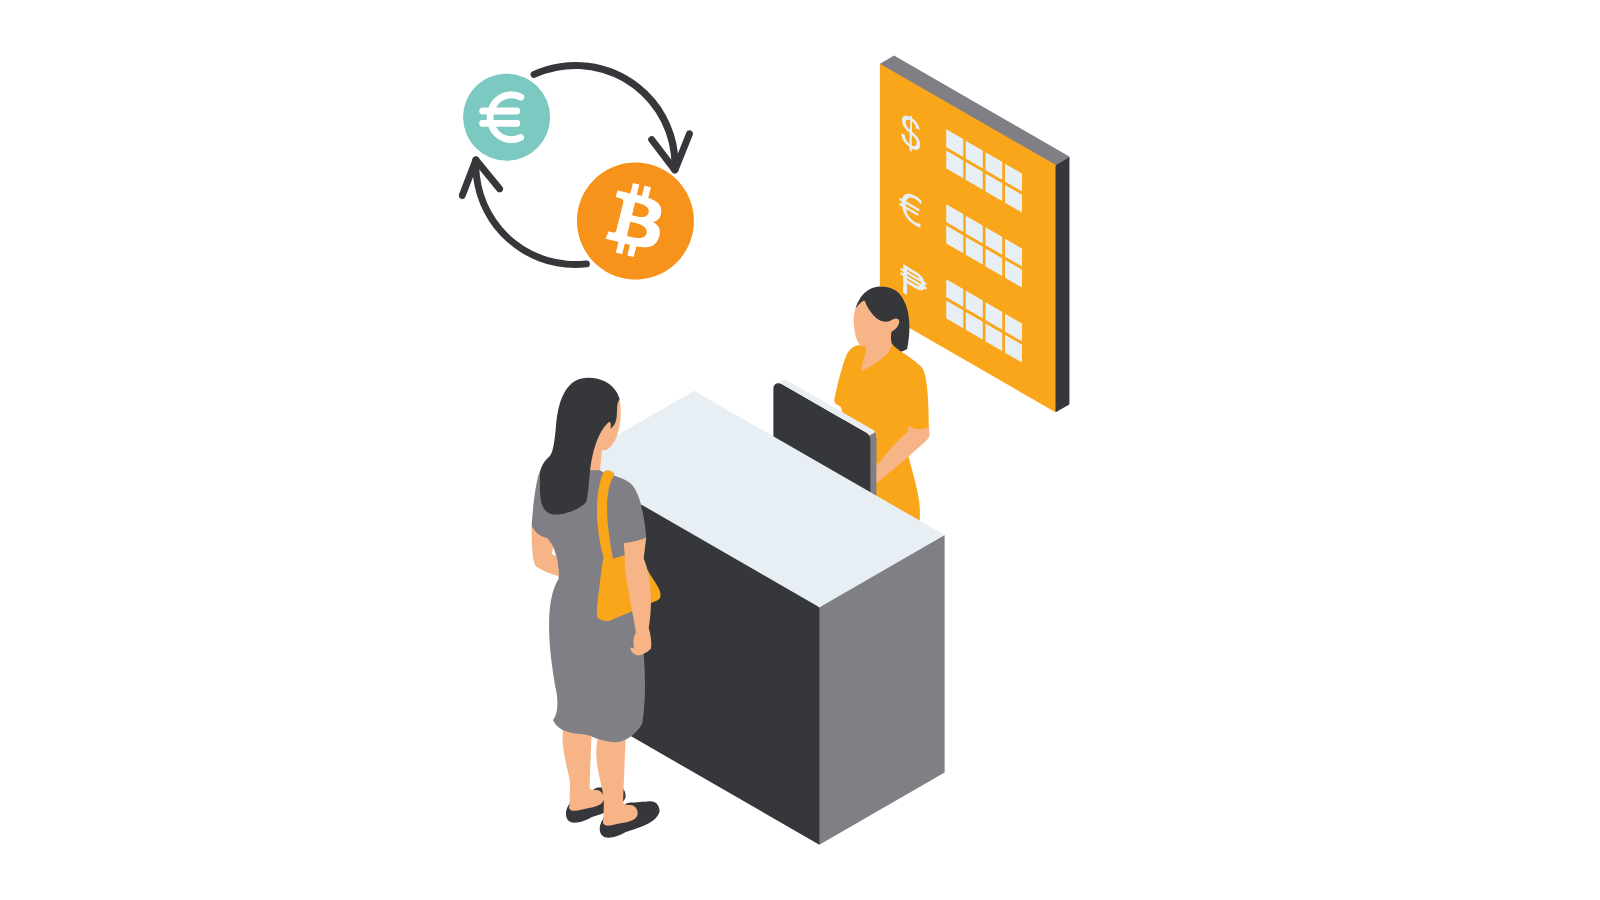 The vector illustrations of a brick-and-mortar cryptocurrency exchange service.